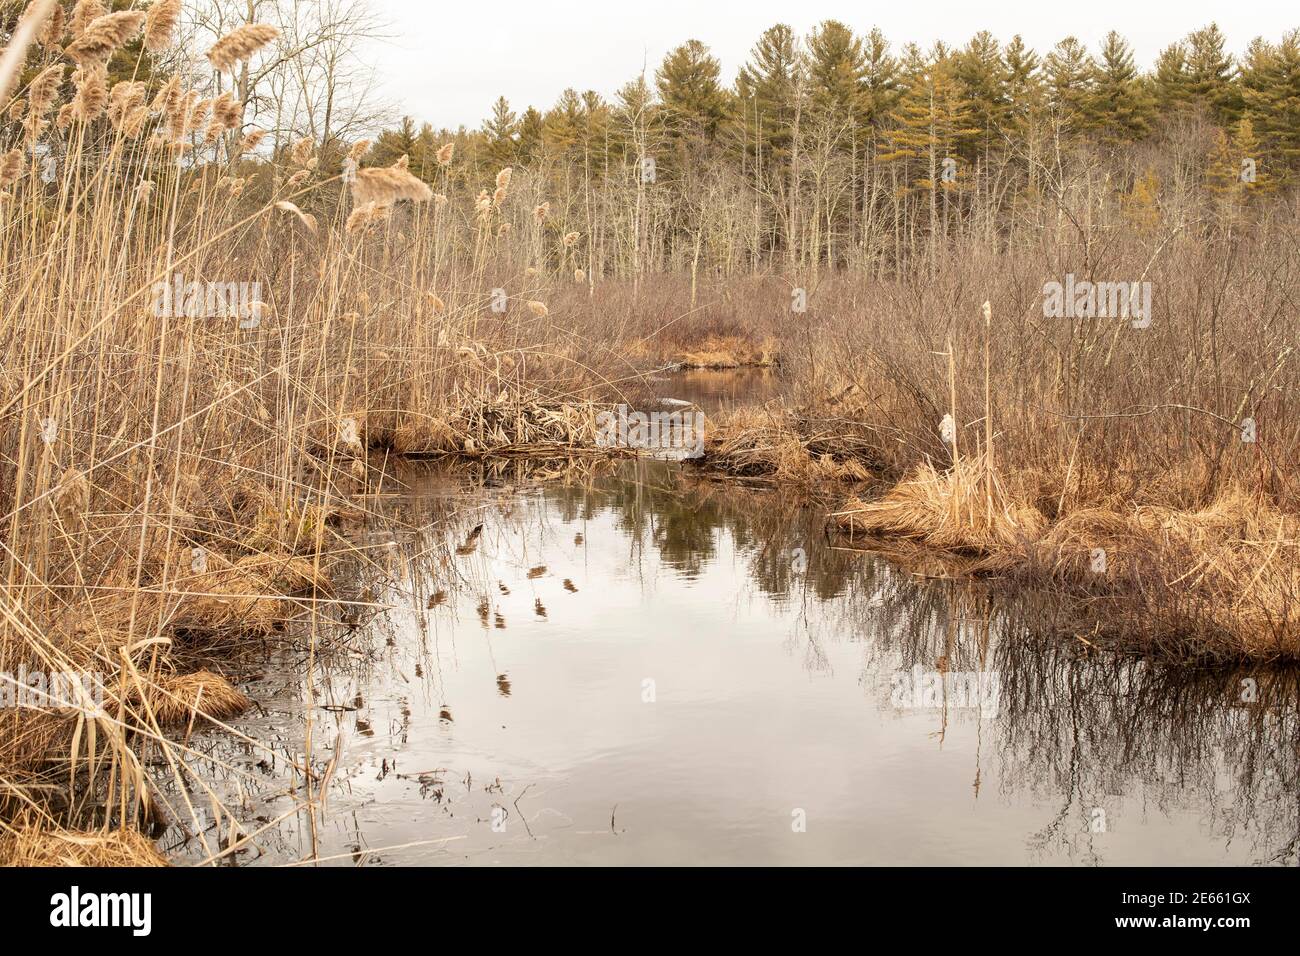 Muddy Brook is a small tributary or stream that runs from Pennichuck Pond, south into Hollis. Plenty of plants, weeds, and wild animals have shown up Stock Photo